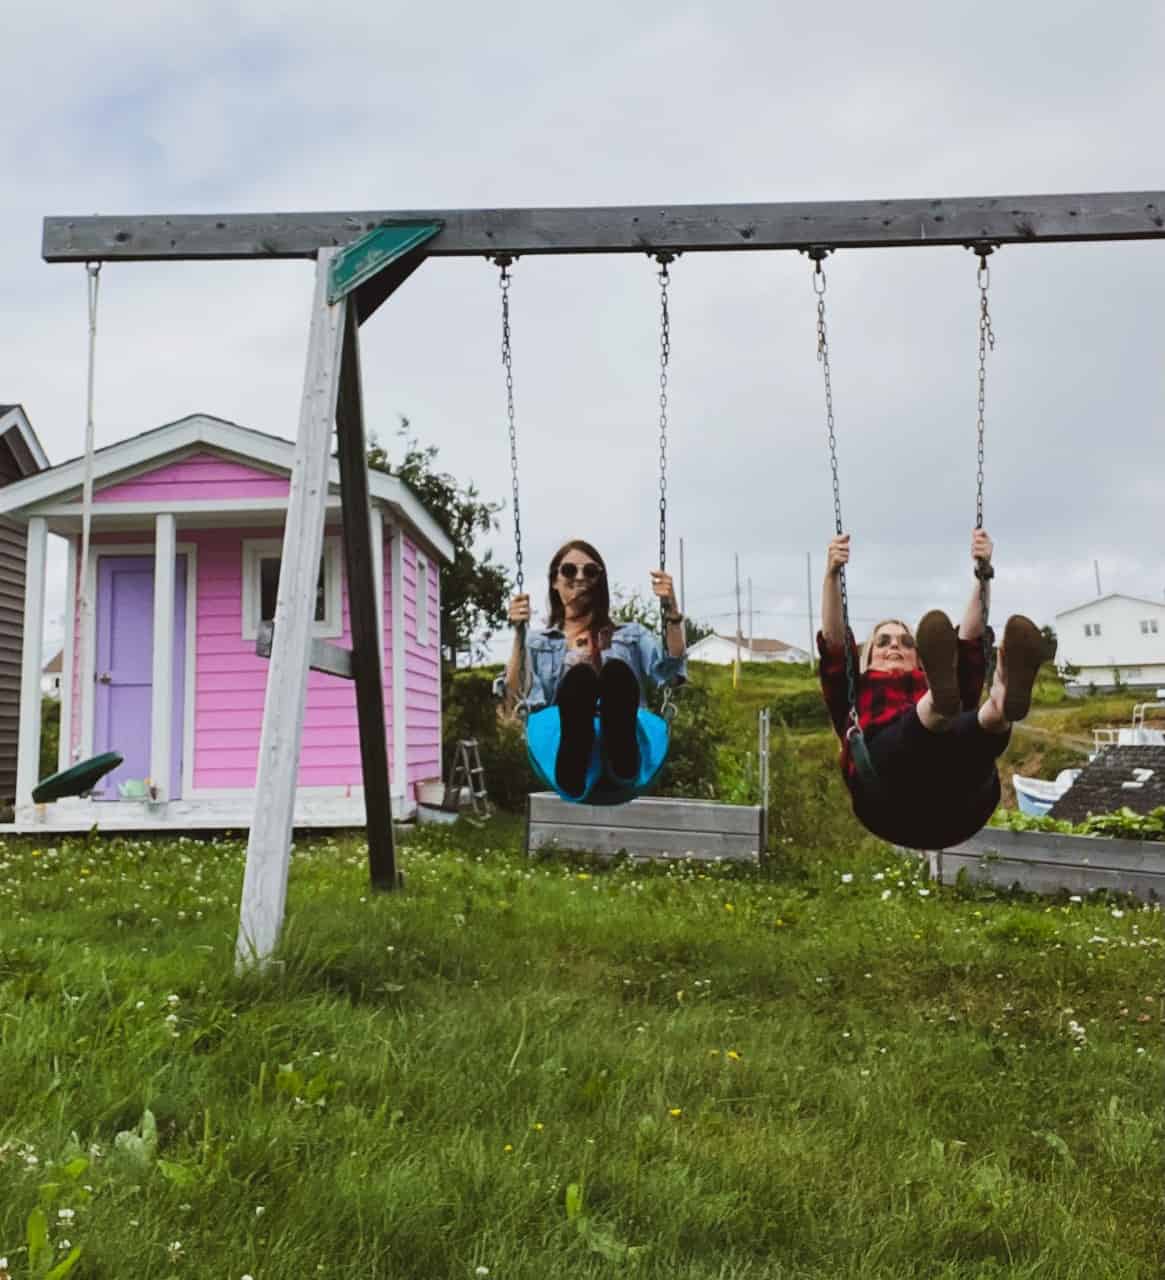 Twillingate Newfoundland and Labrador Canada is an Outdoor Playground - Twillingate Newfoundland is an outdoor playground for adventure enthusiasts and explorers. I felt like a kid again playing on this swing set at a friends house. 